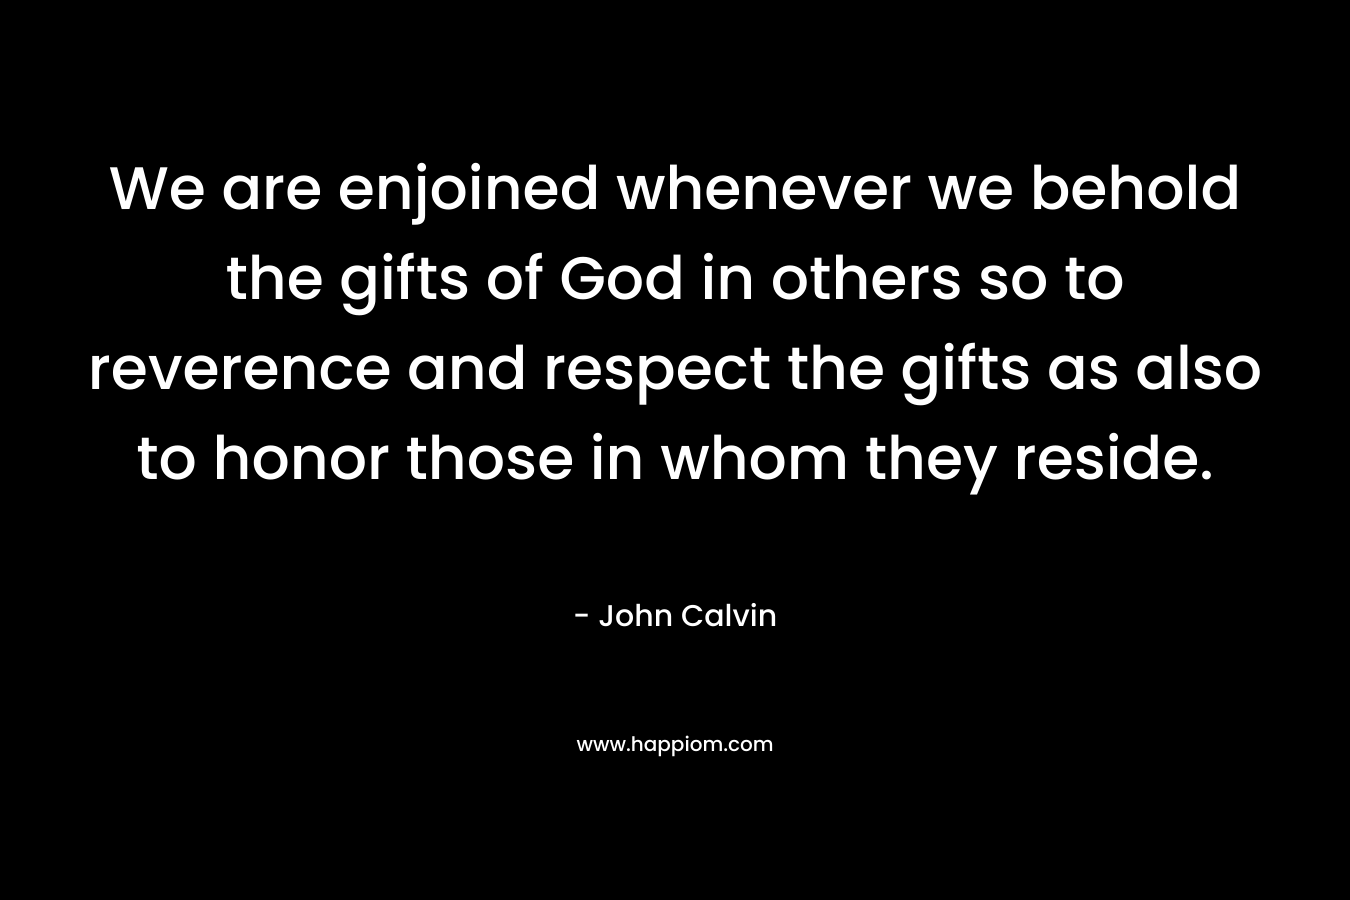 We are enjoined whenever we behold the gifts of God in others so to reverence and respect the gifts as also to honor those in whom they reside.